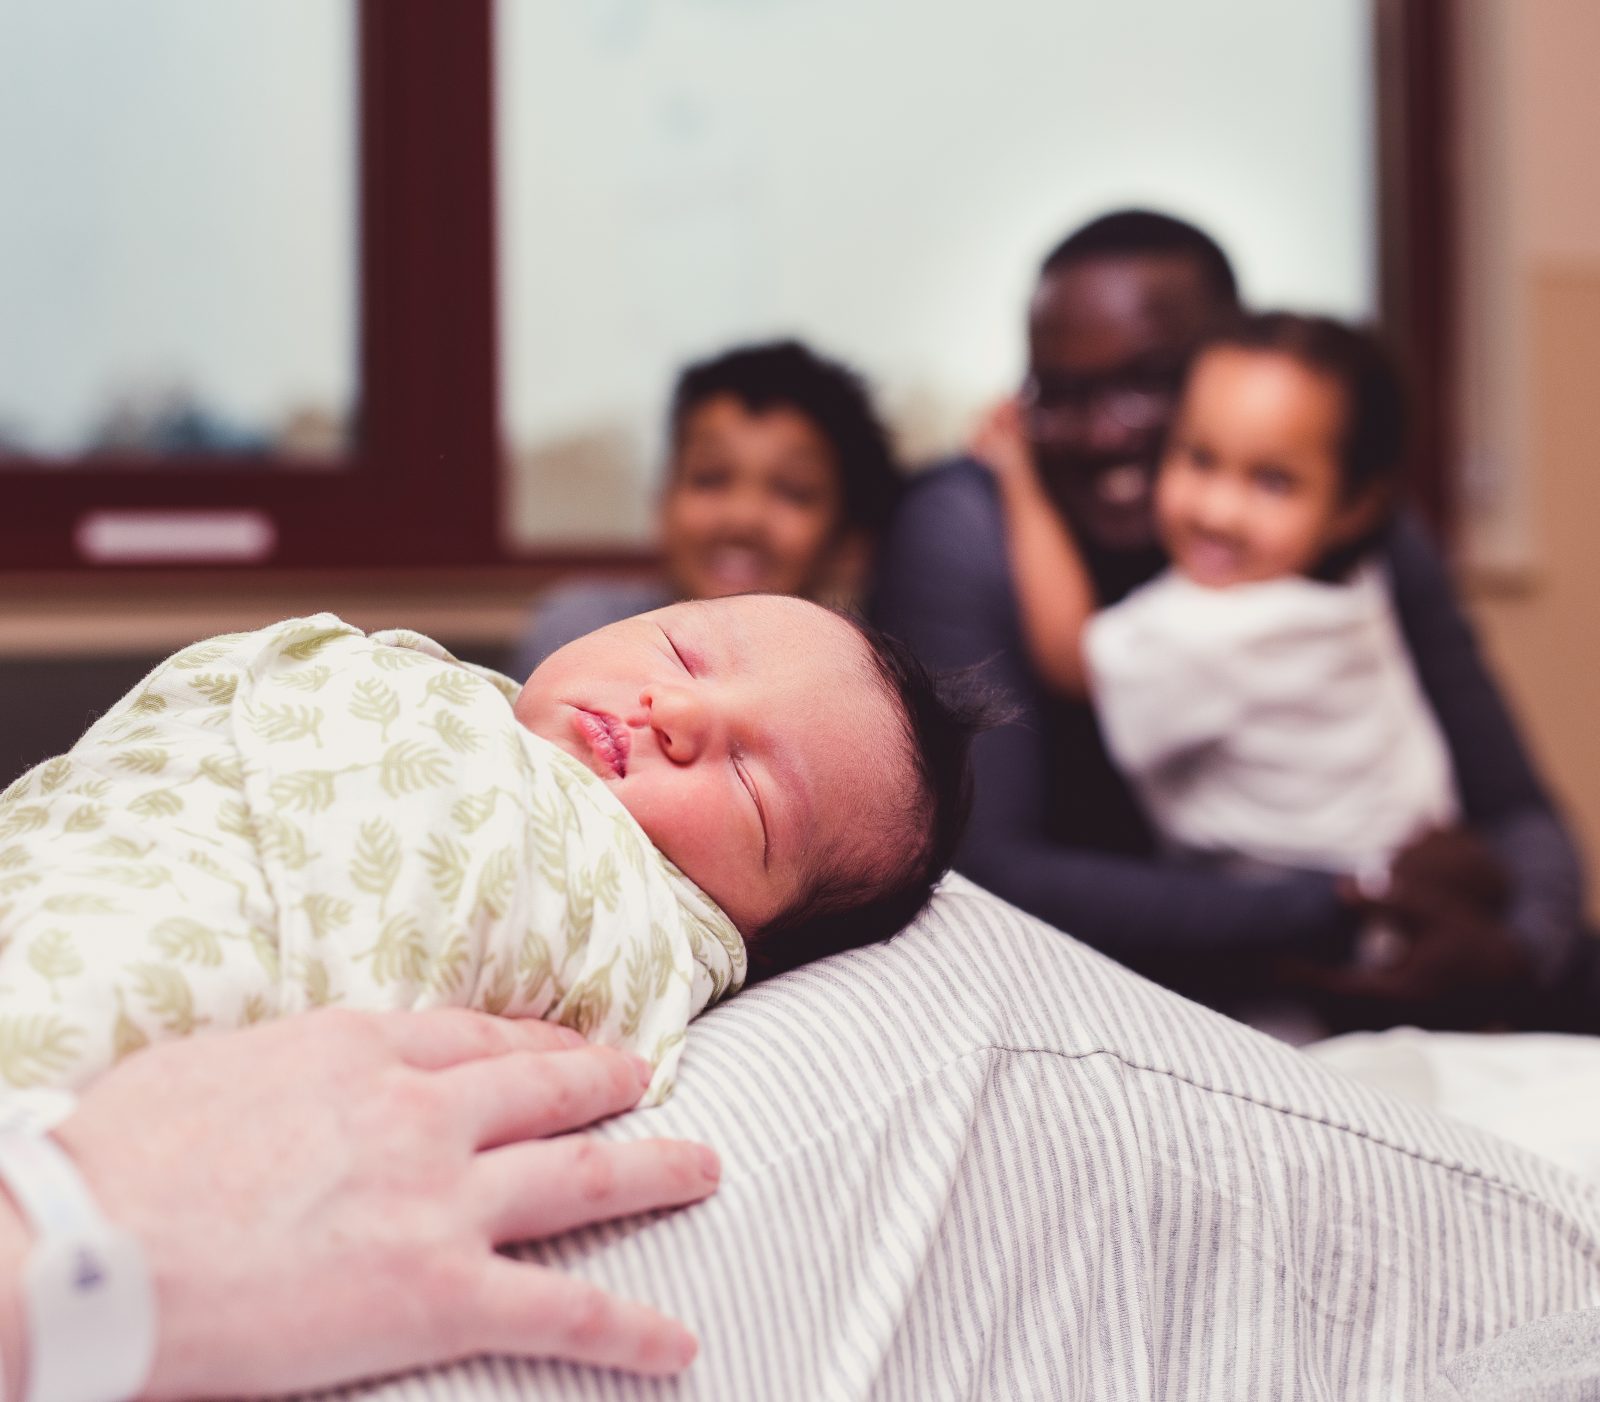 swaddled newborn sits on mom's knees with father and siblings in the background in the background